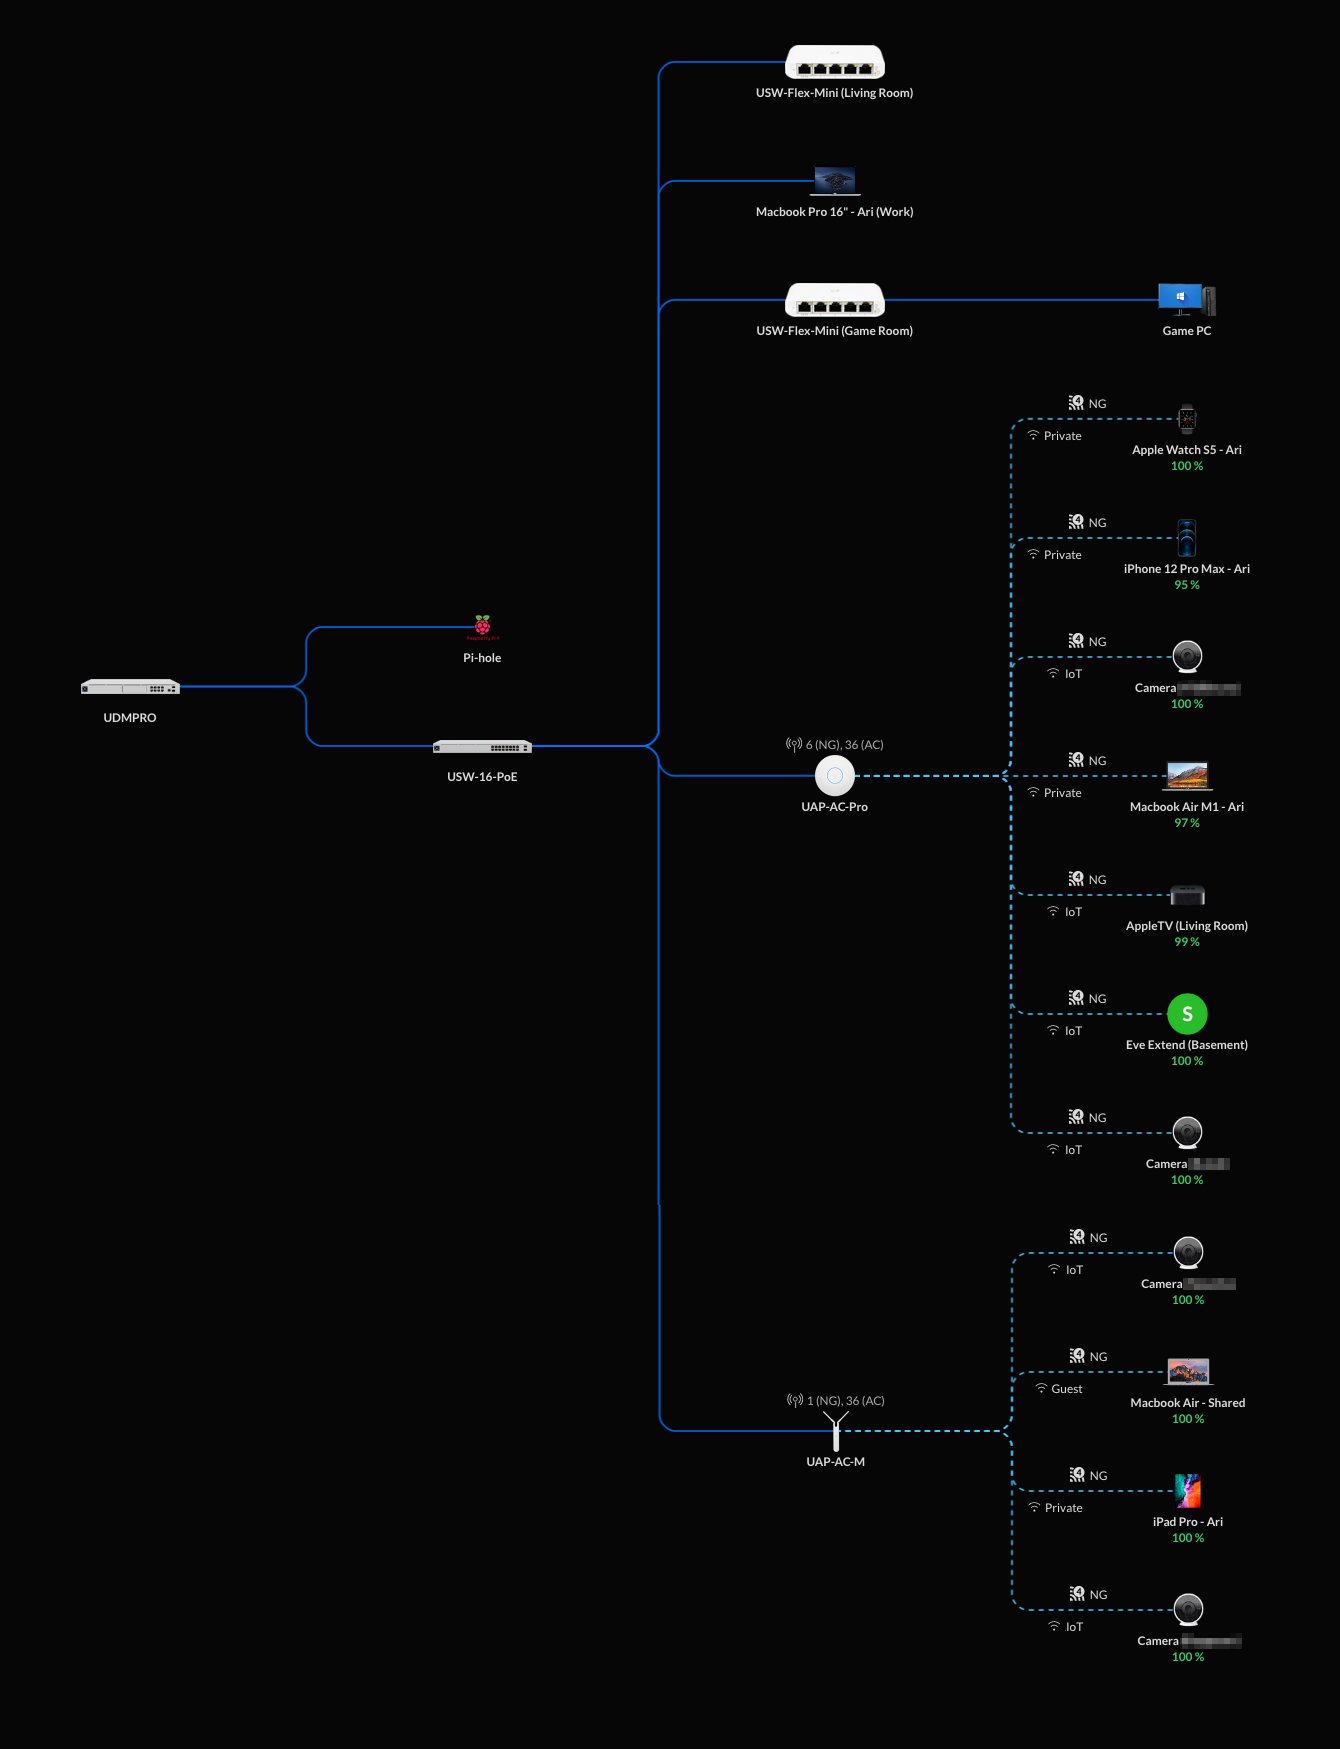 Network Topology view from Unifi